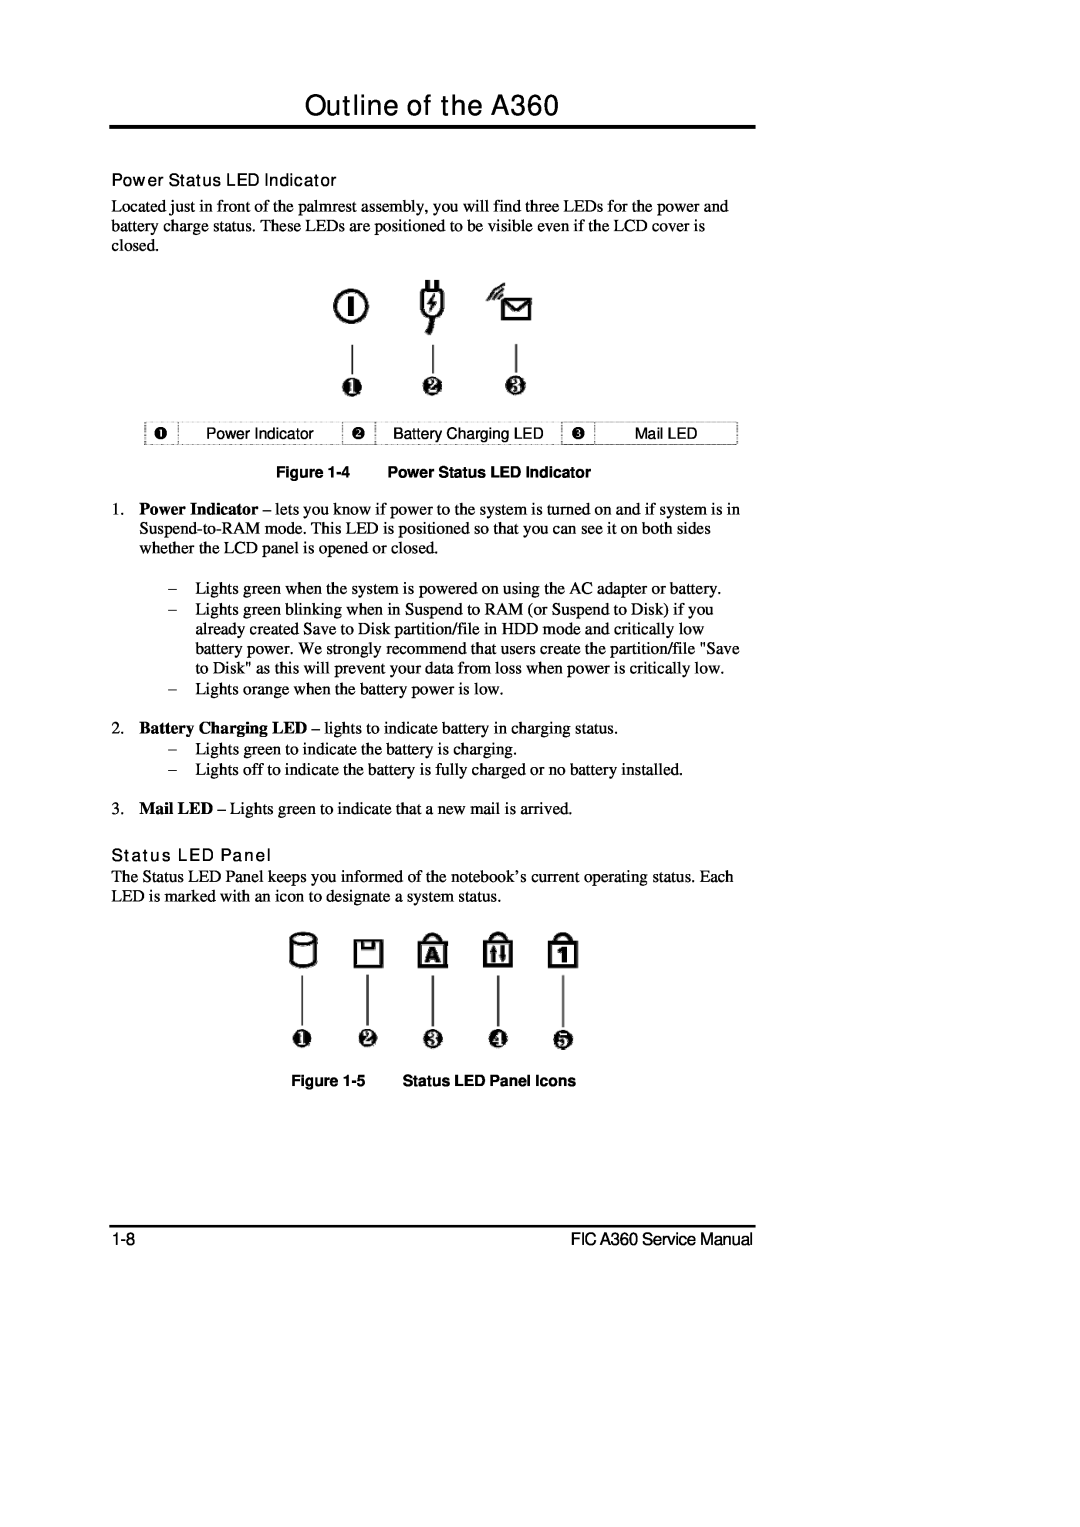 FIC service manual Outline of the A360, Power Status LED Indicator, Status LED Panel 